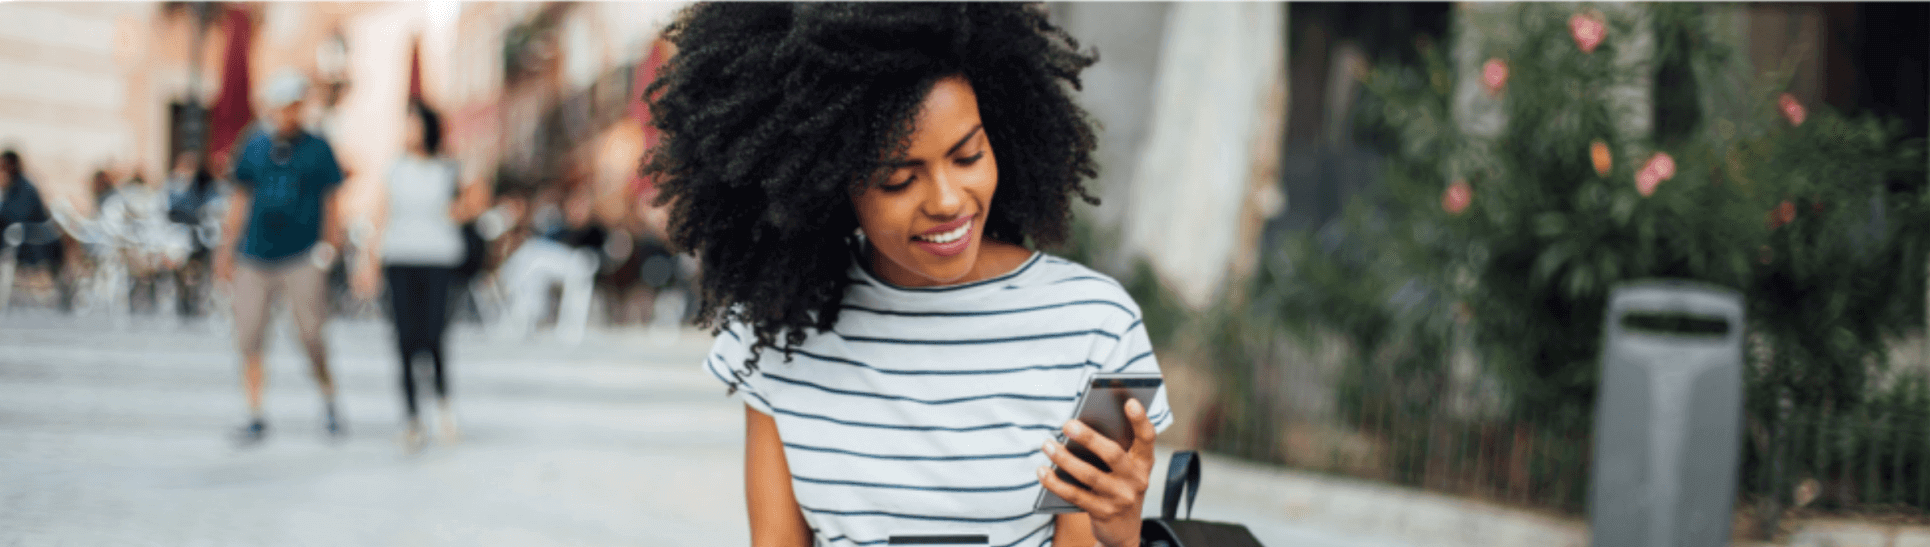 Image of woman looking at phone getting digital support